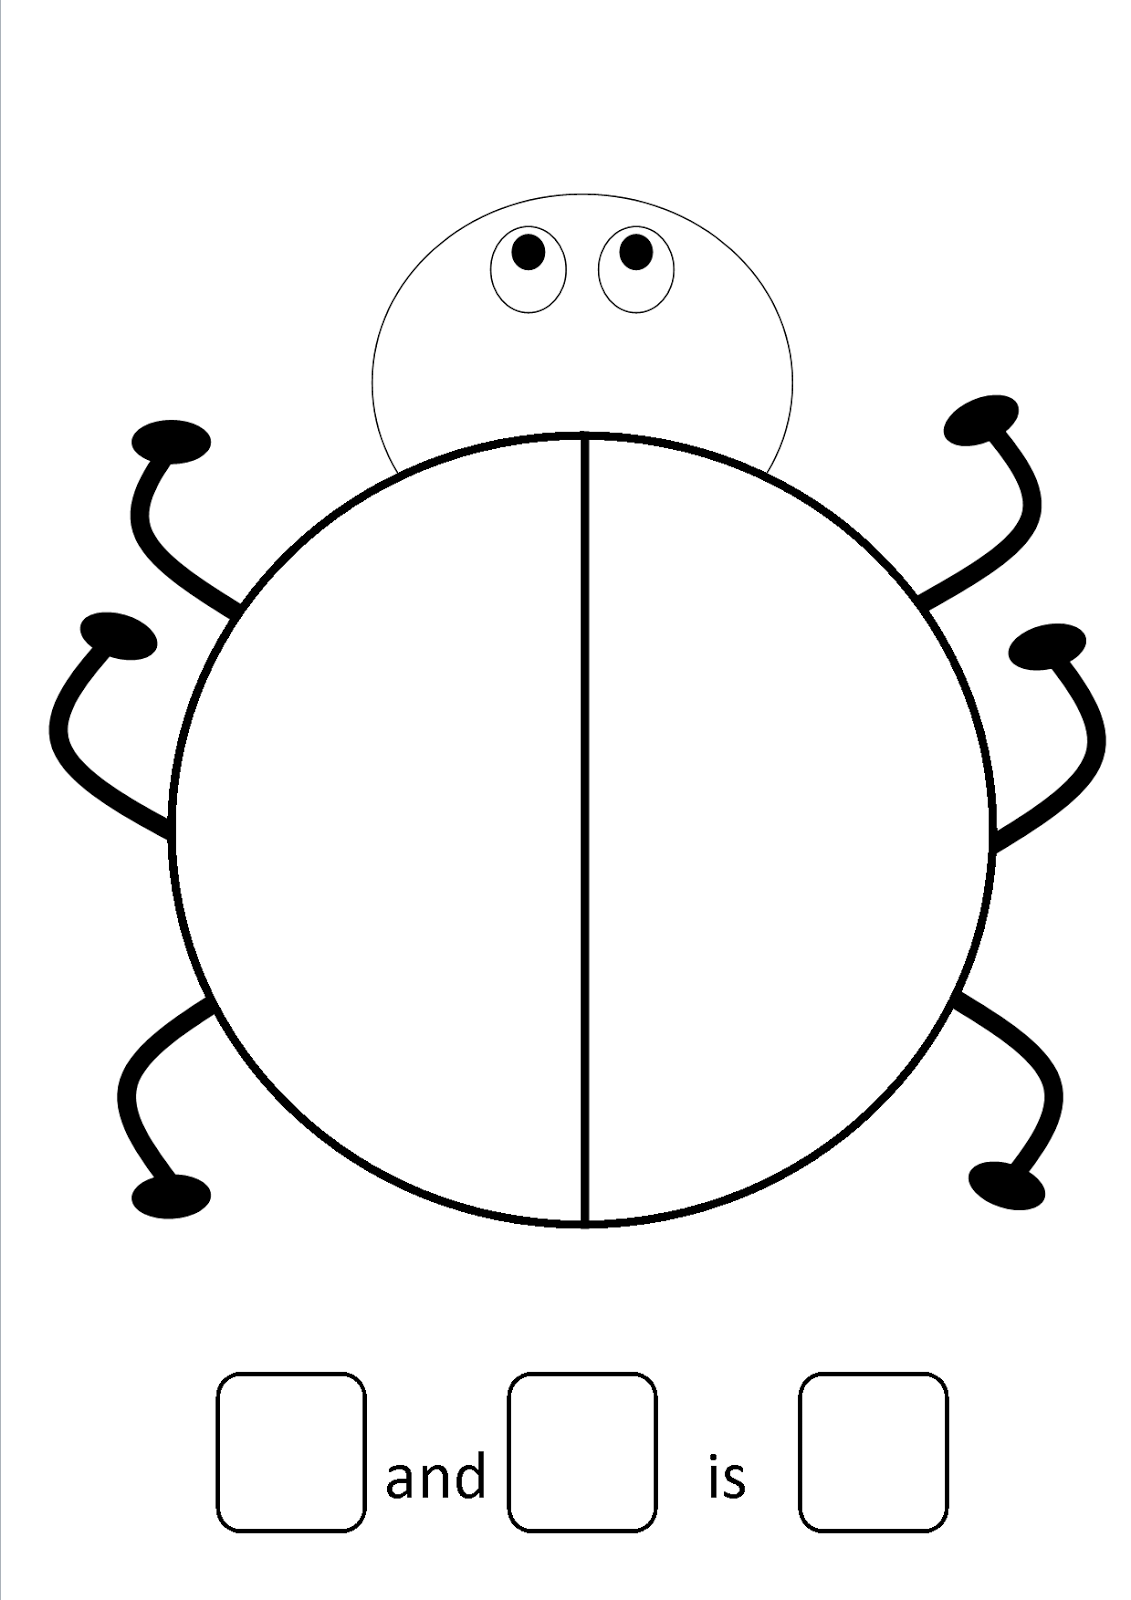 Ladybird Template - ClipArt Best Pertaining To Blank Ladybug Template